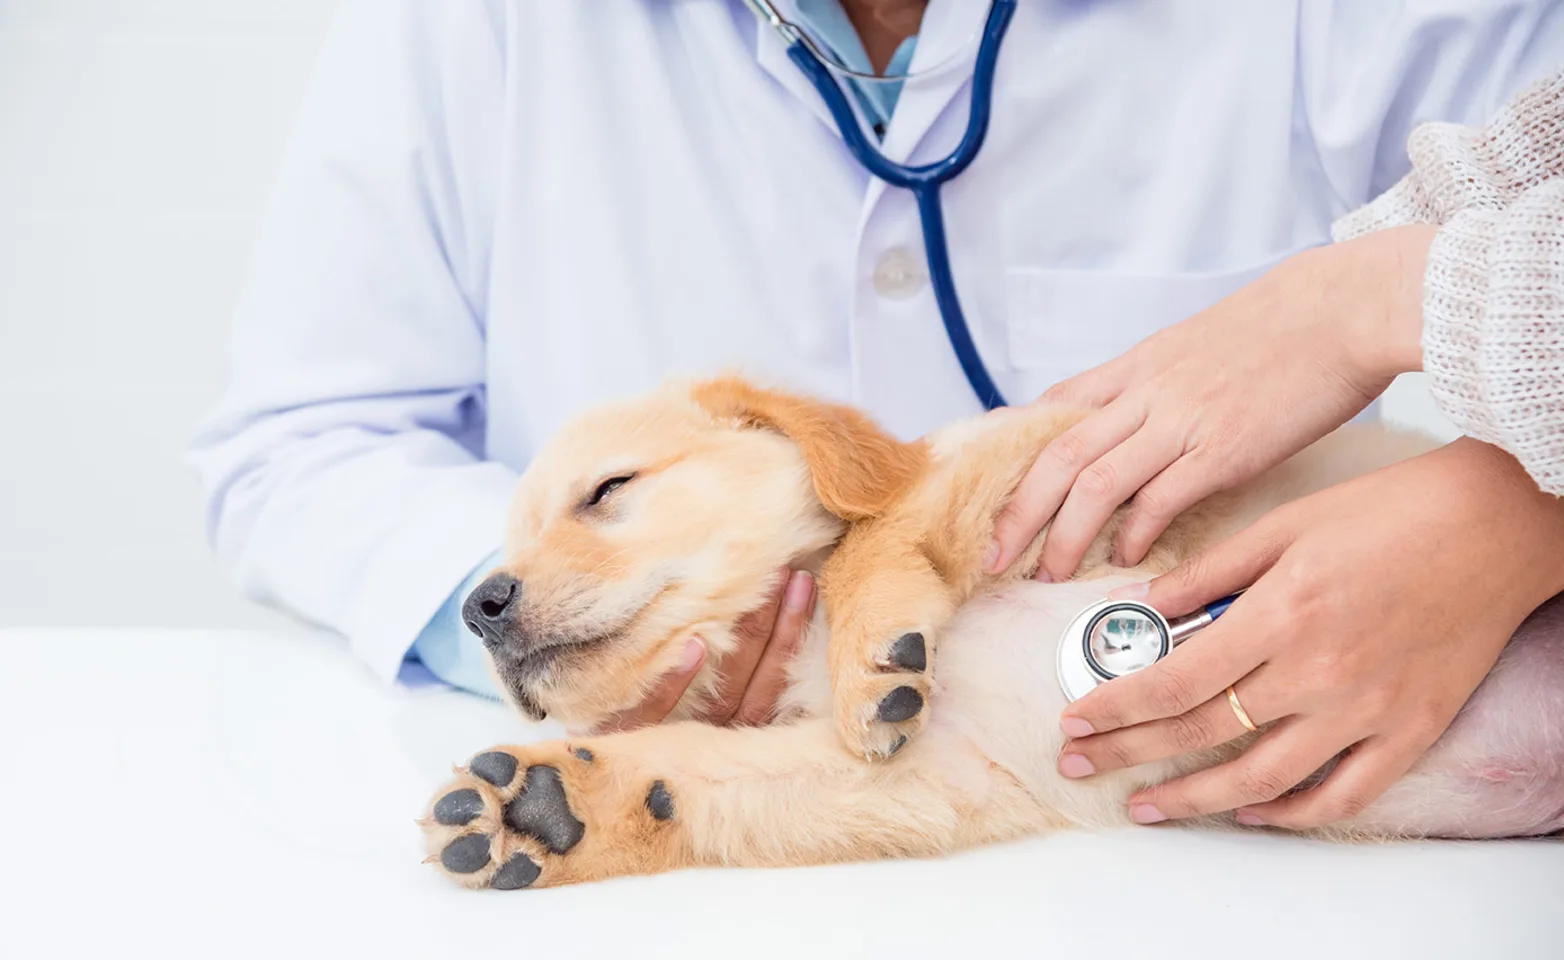 Puppy on examination table being examined with stethoscope